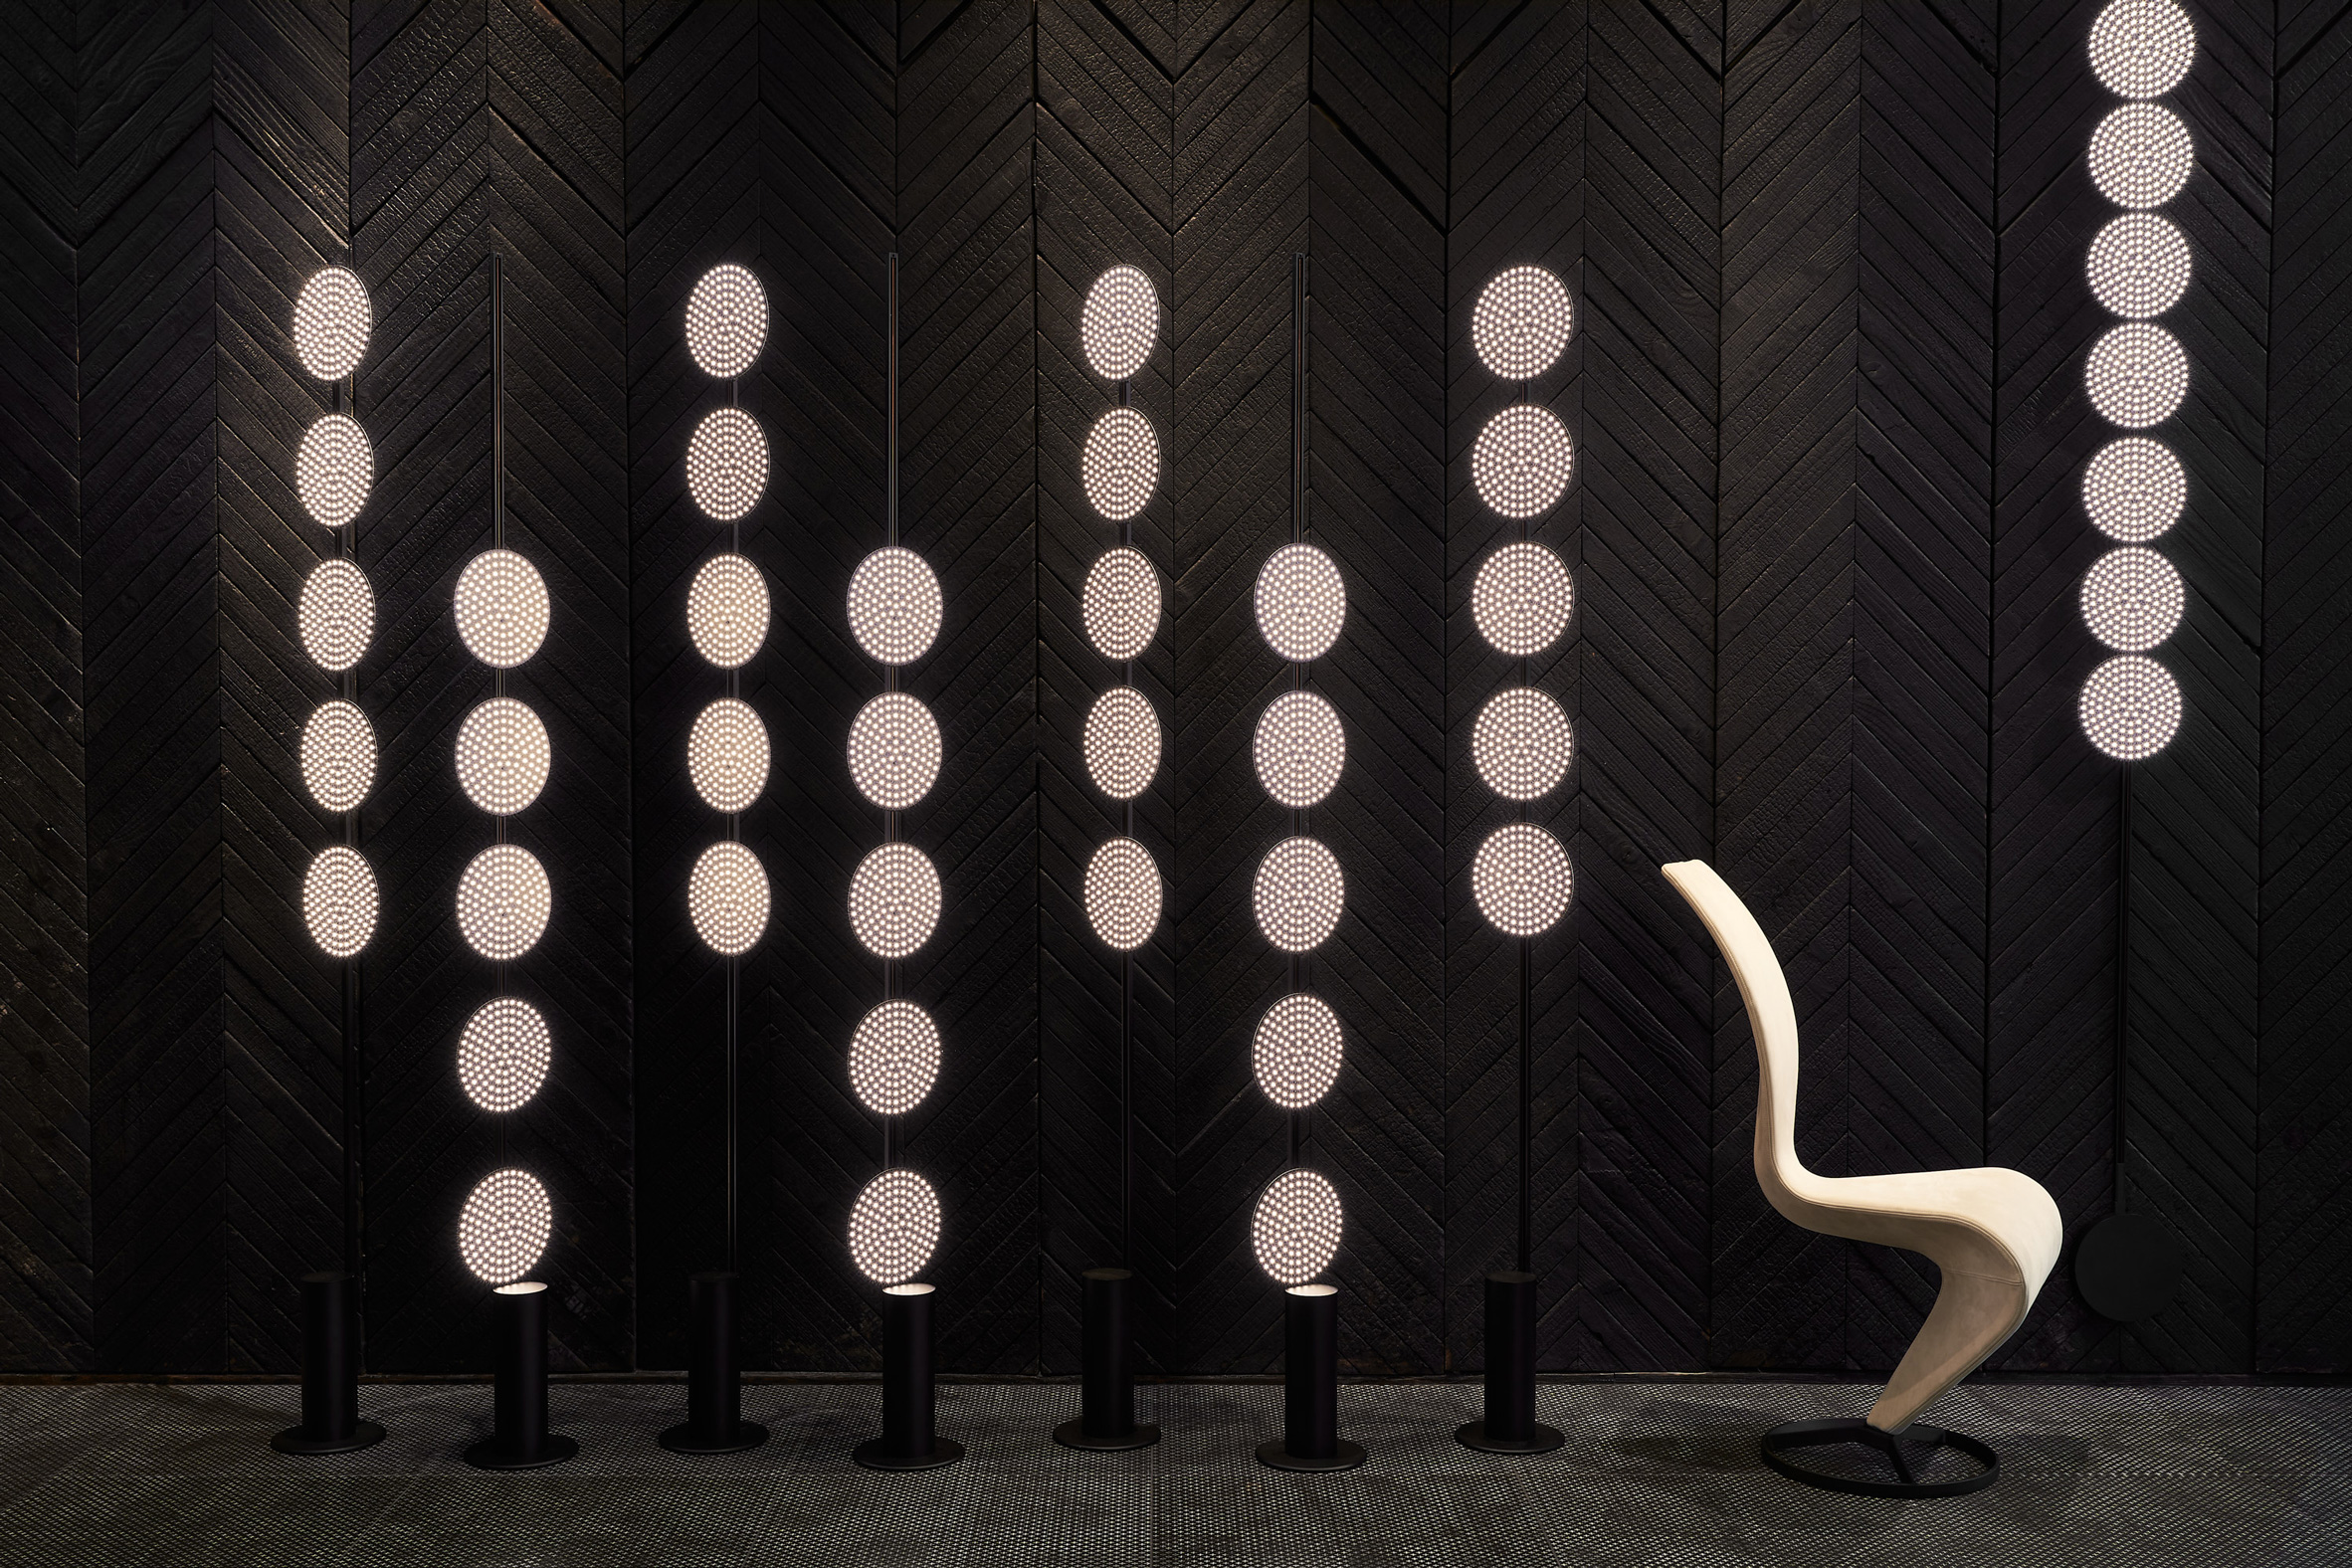 Tom Dixon has collaborated with Austrian lighting brand Prolicht to design Code, an LED track lighting collection